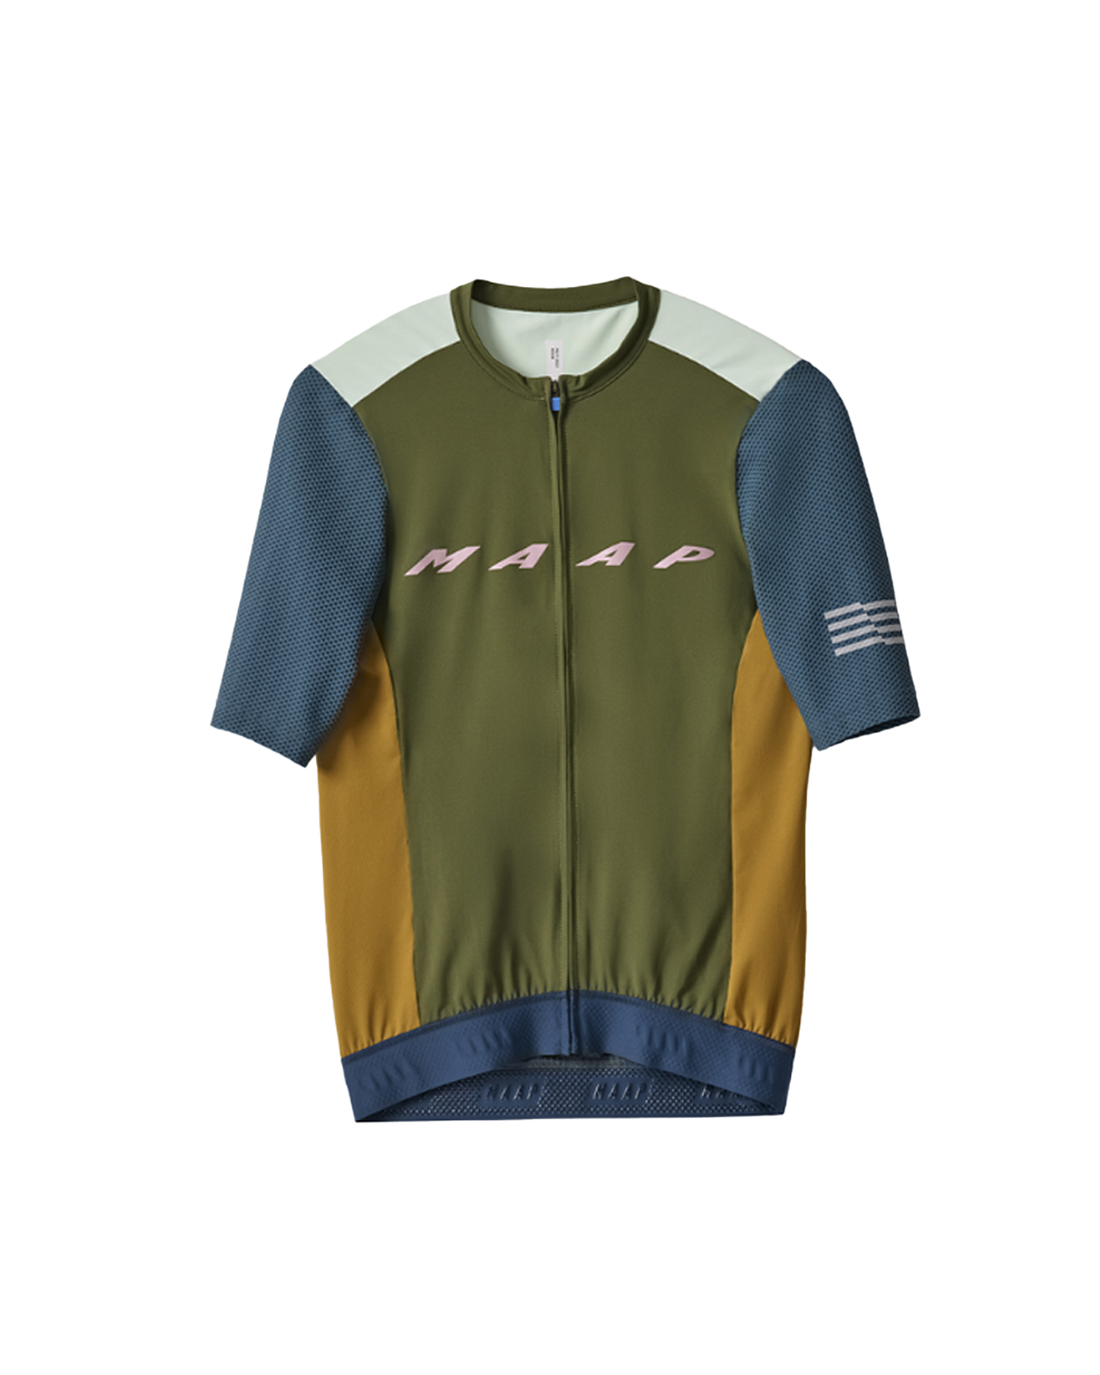 Evade Off Cuts Pro Jersey - Military - MAAP